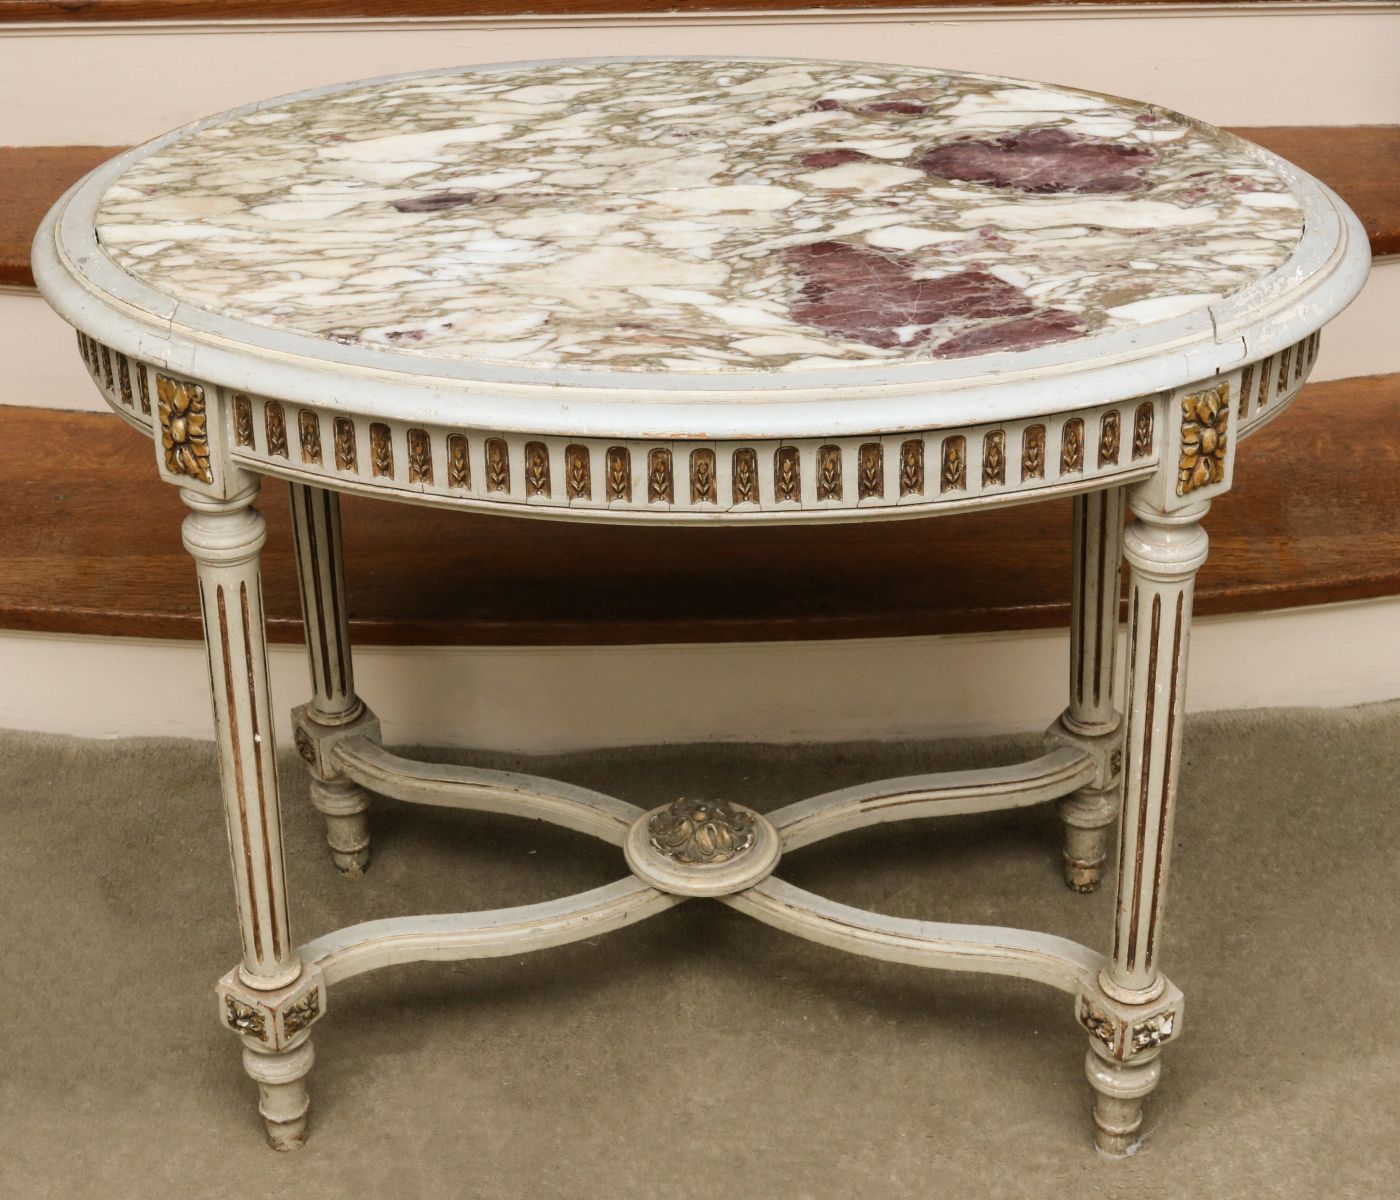 A 19th c. LOUIS XVI STYLE CENTER TABLE WITH MARBLE